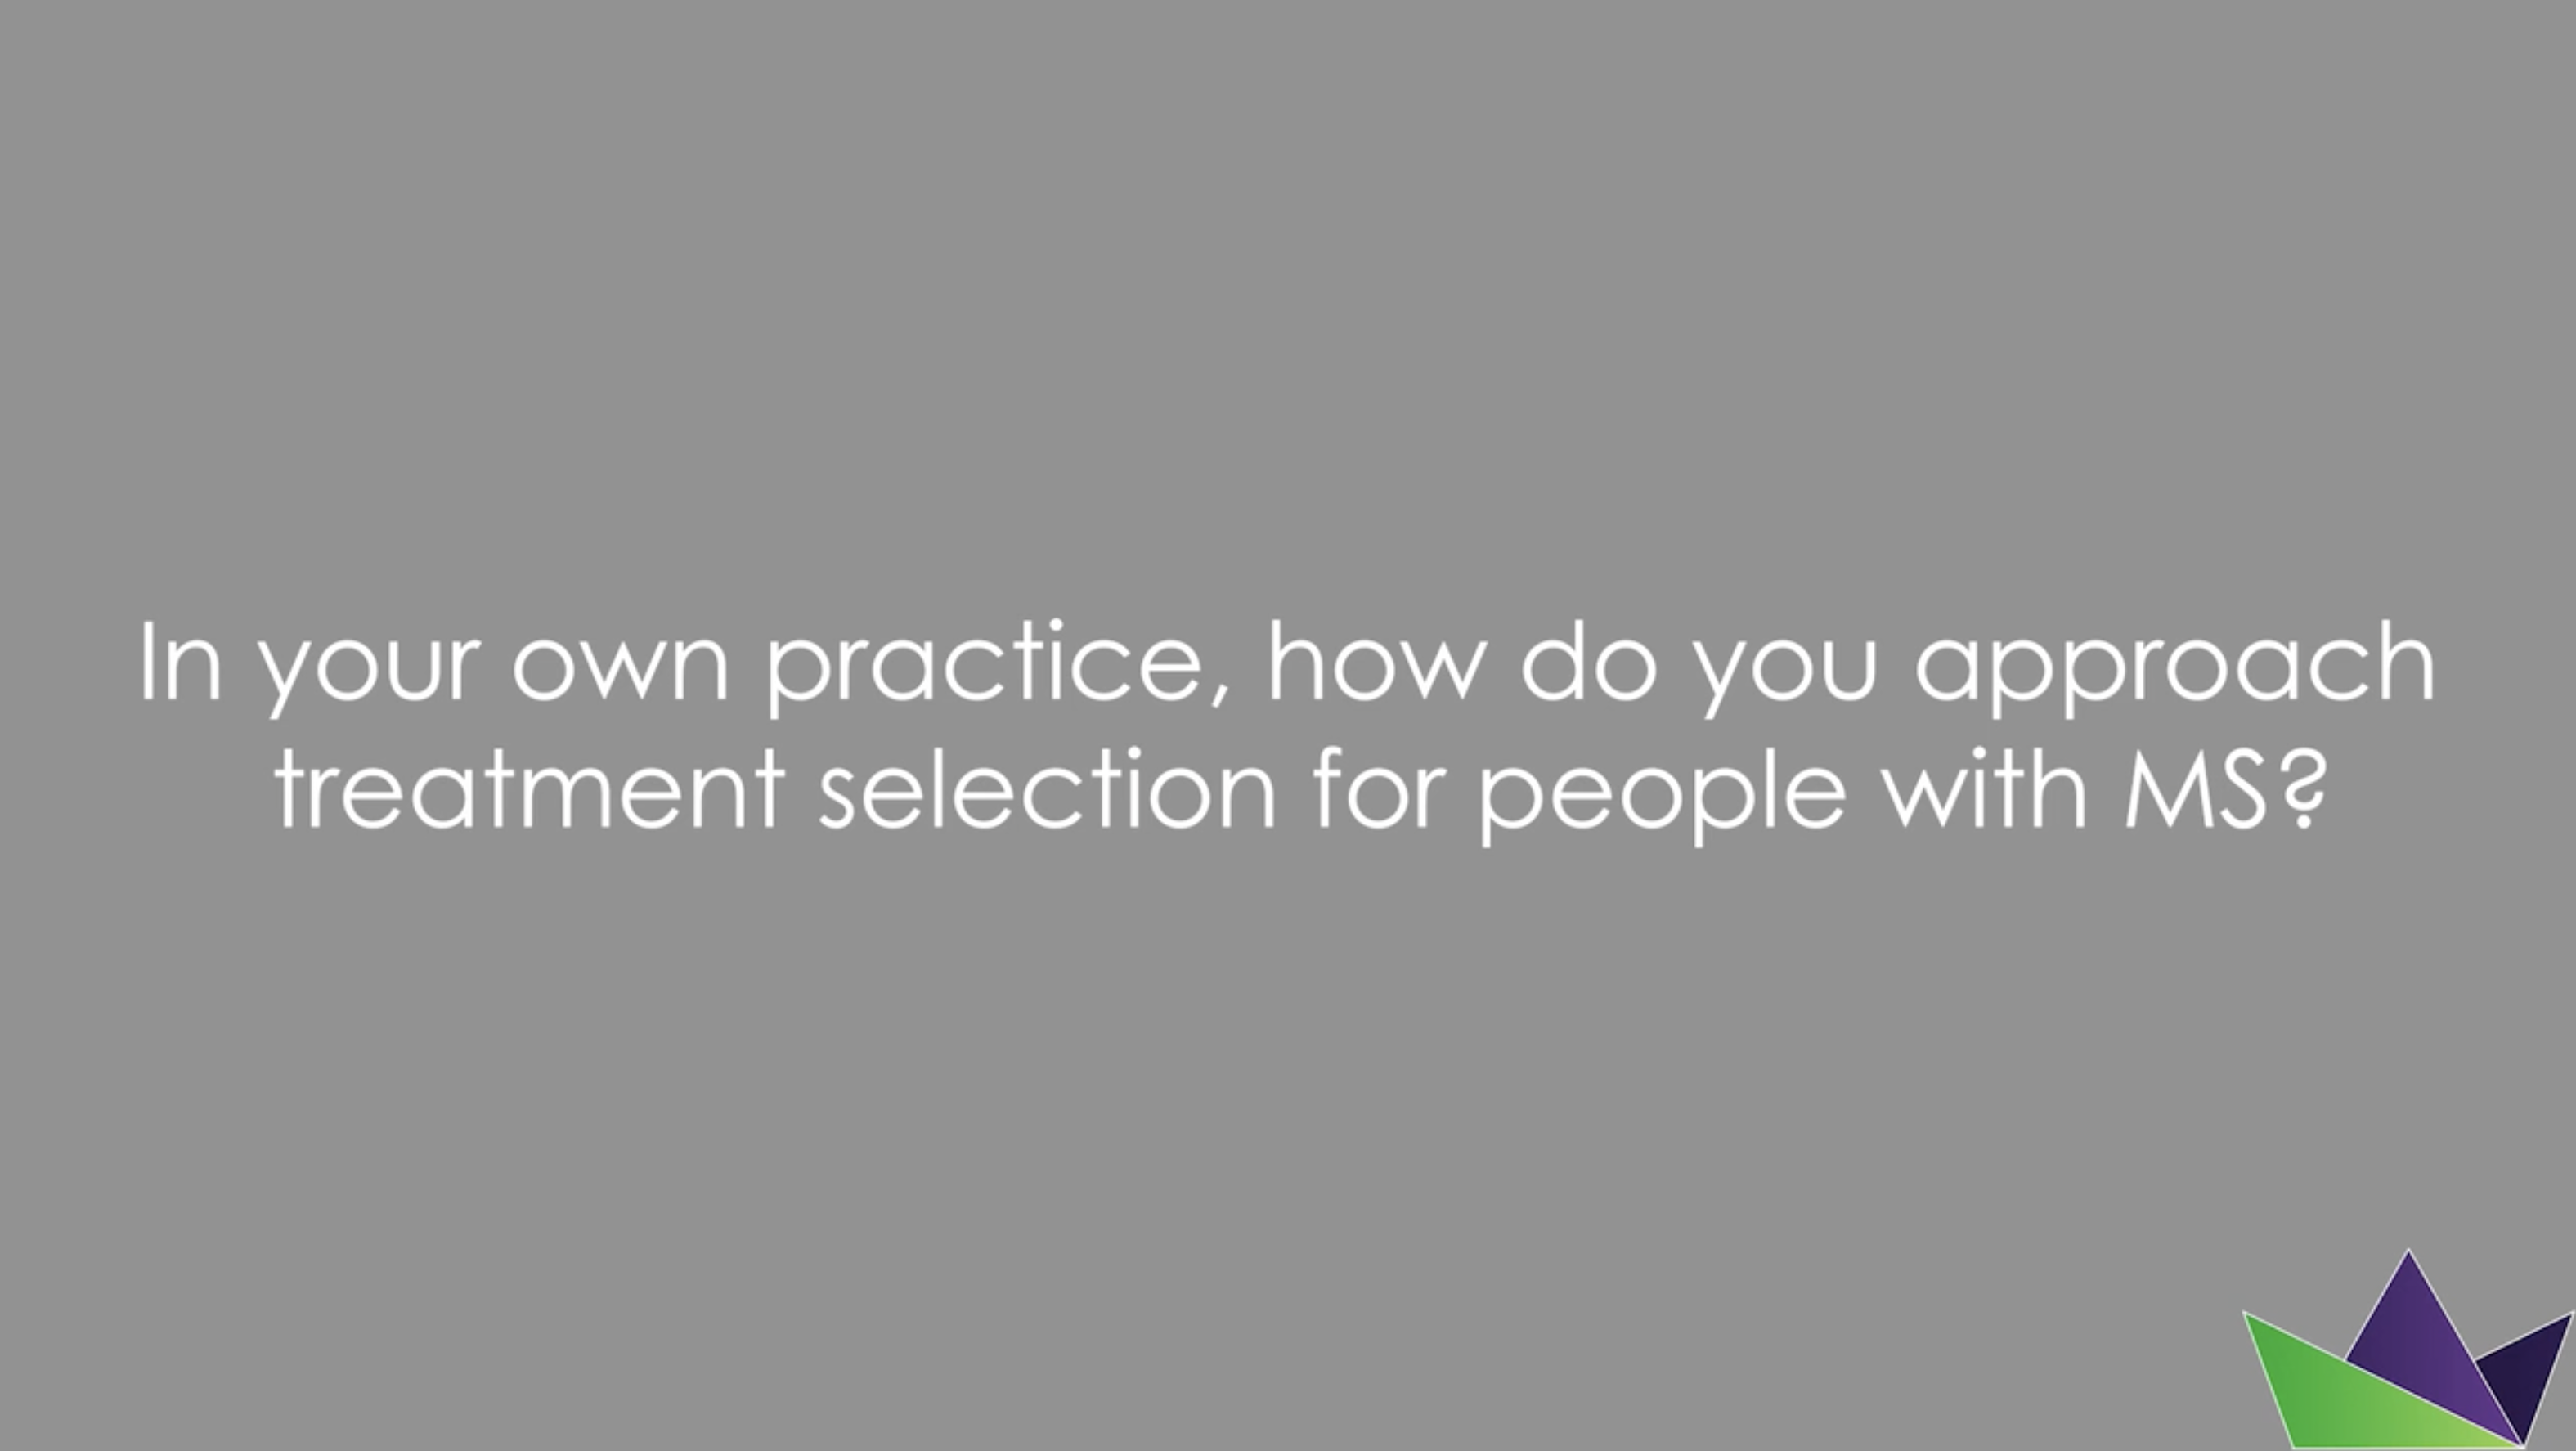 In your own practice, how do you approach treatment selection for people with MS